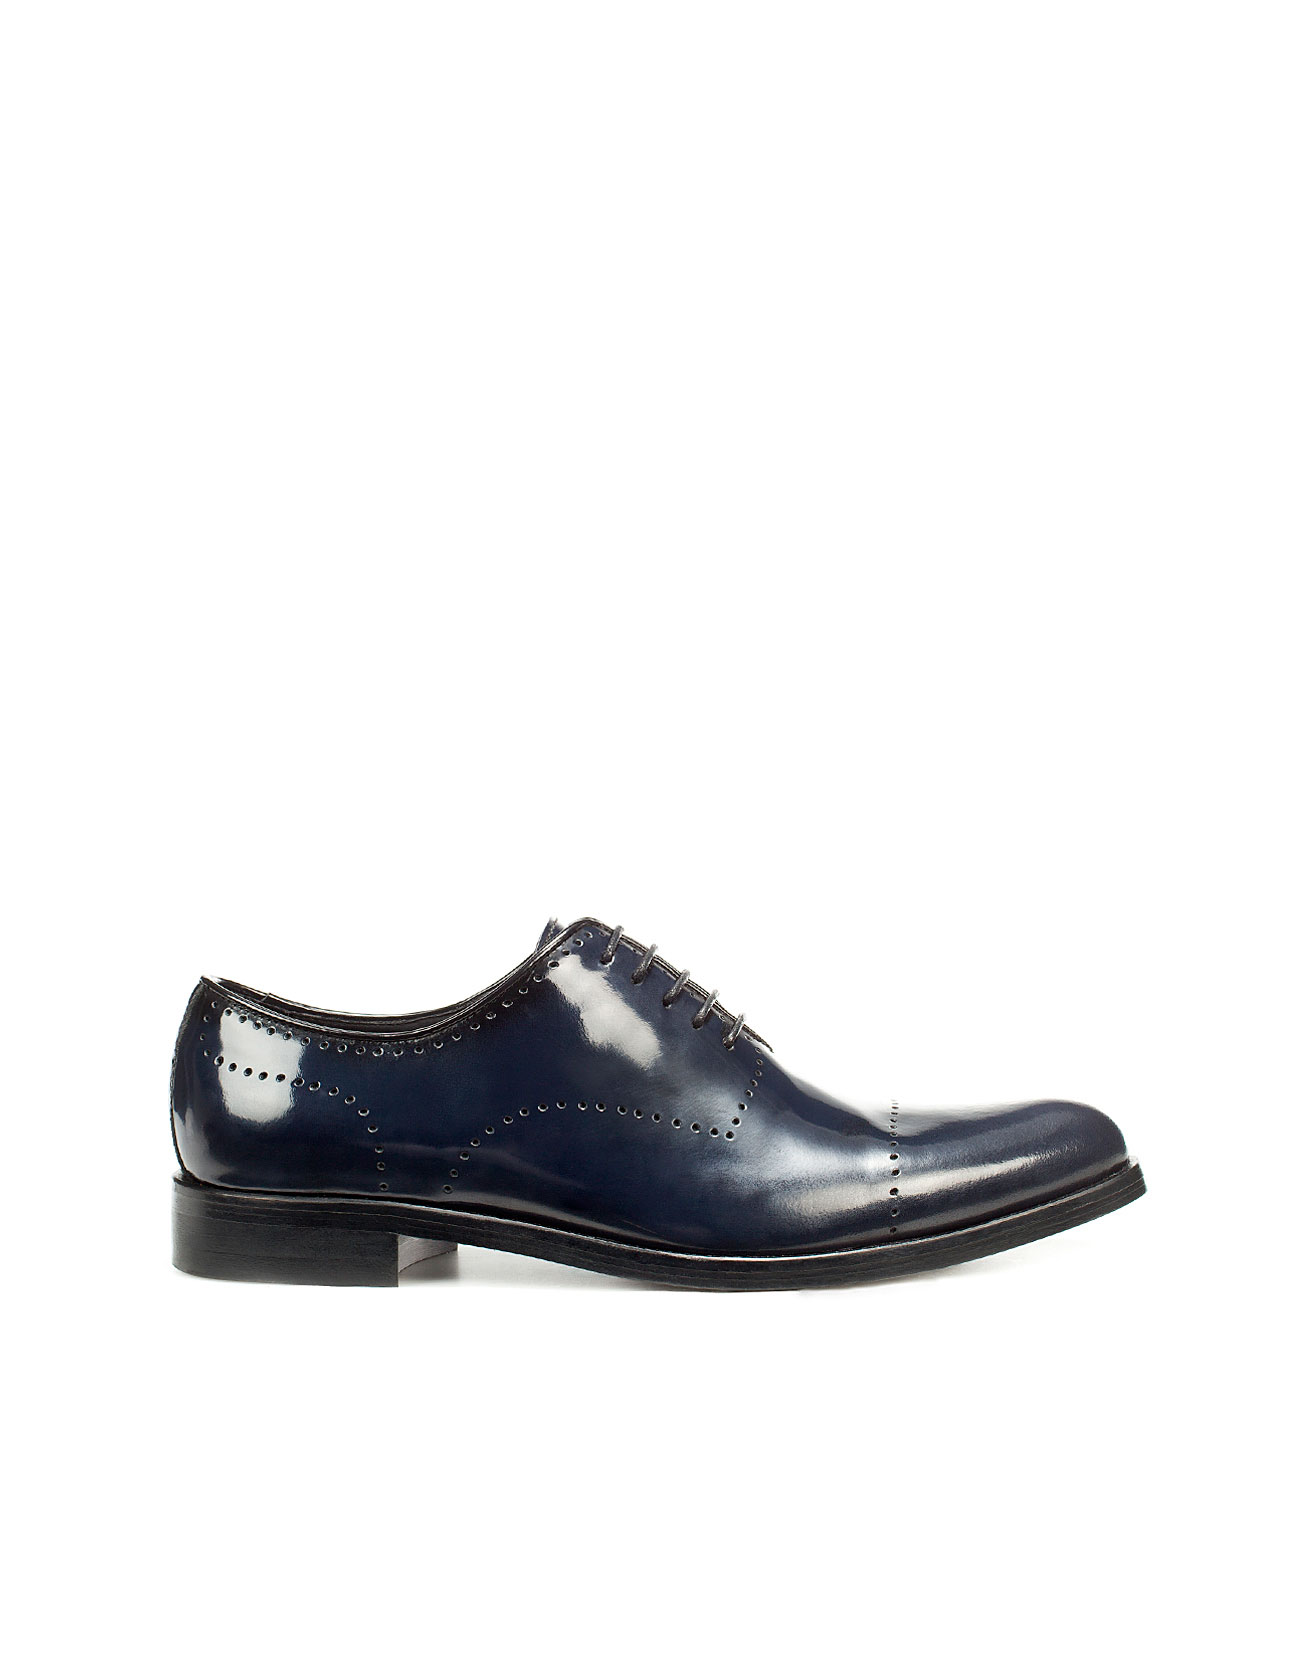 Zara Antik Leather Oxford Shoes in Blue for Men (navy) | Lyst